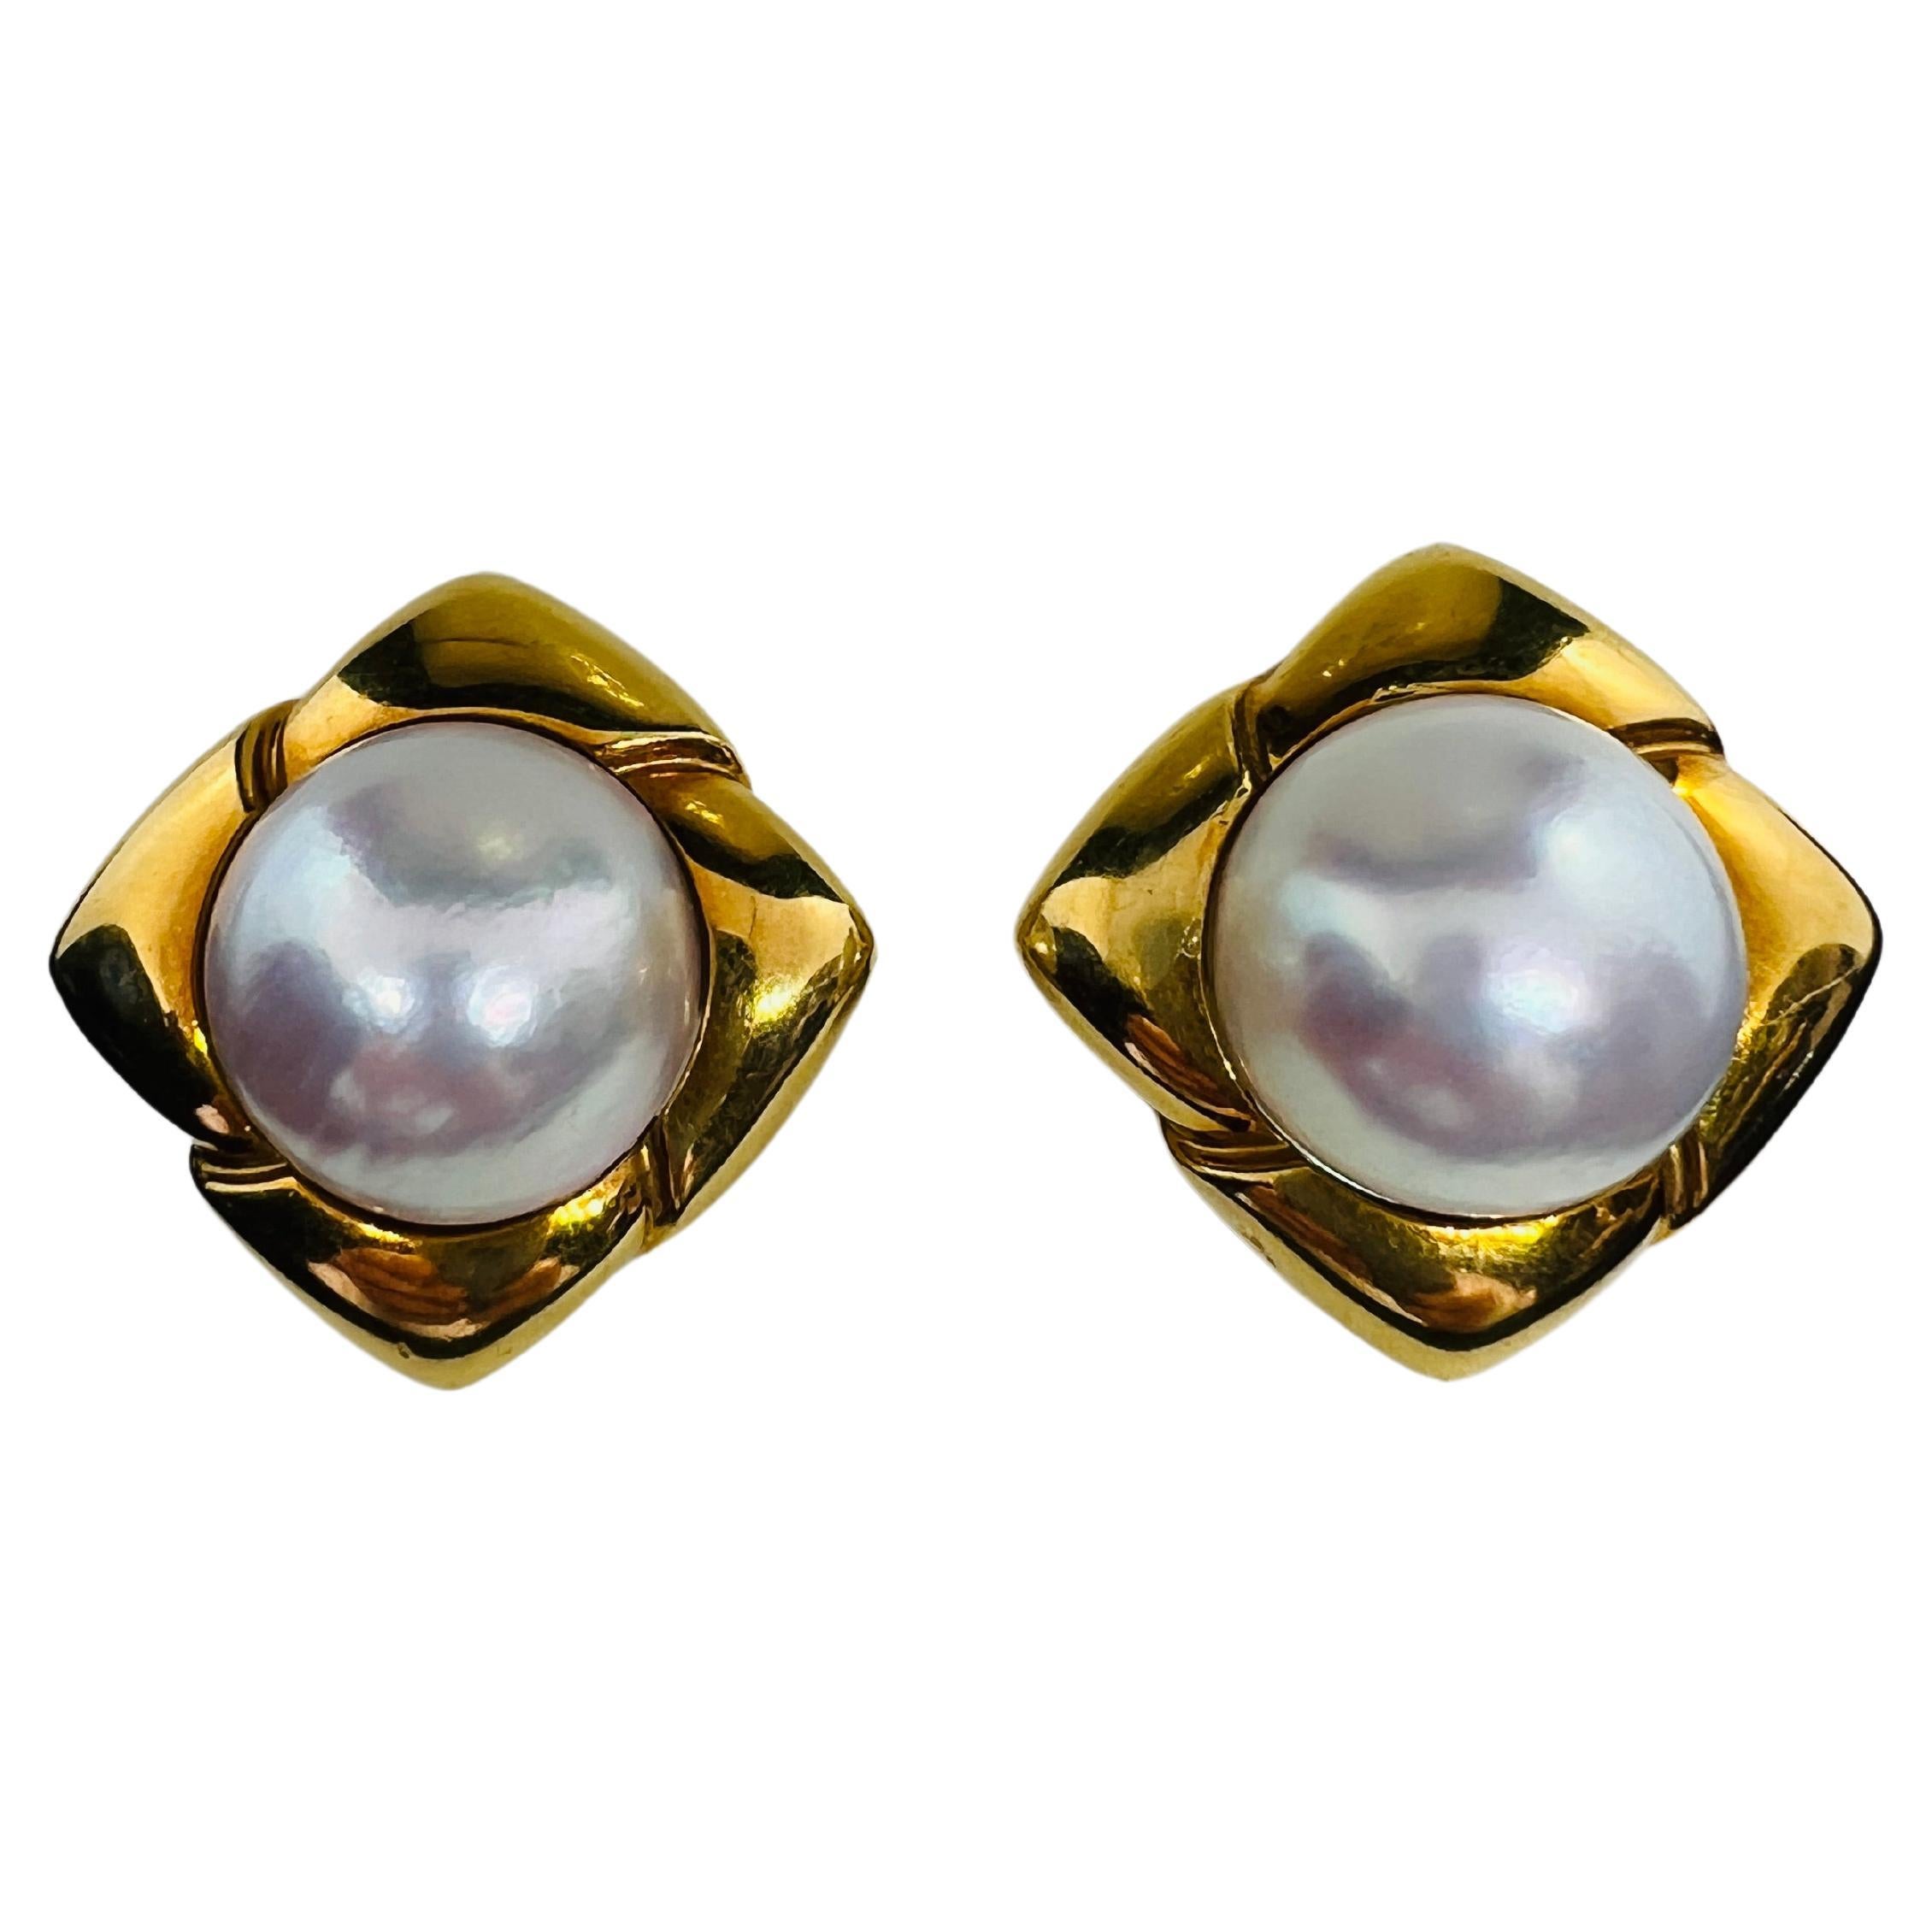 Hammerman Brothers 18K yellow Gold & More pearl Clip on Earrings 35.4 grams